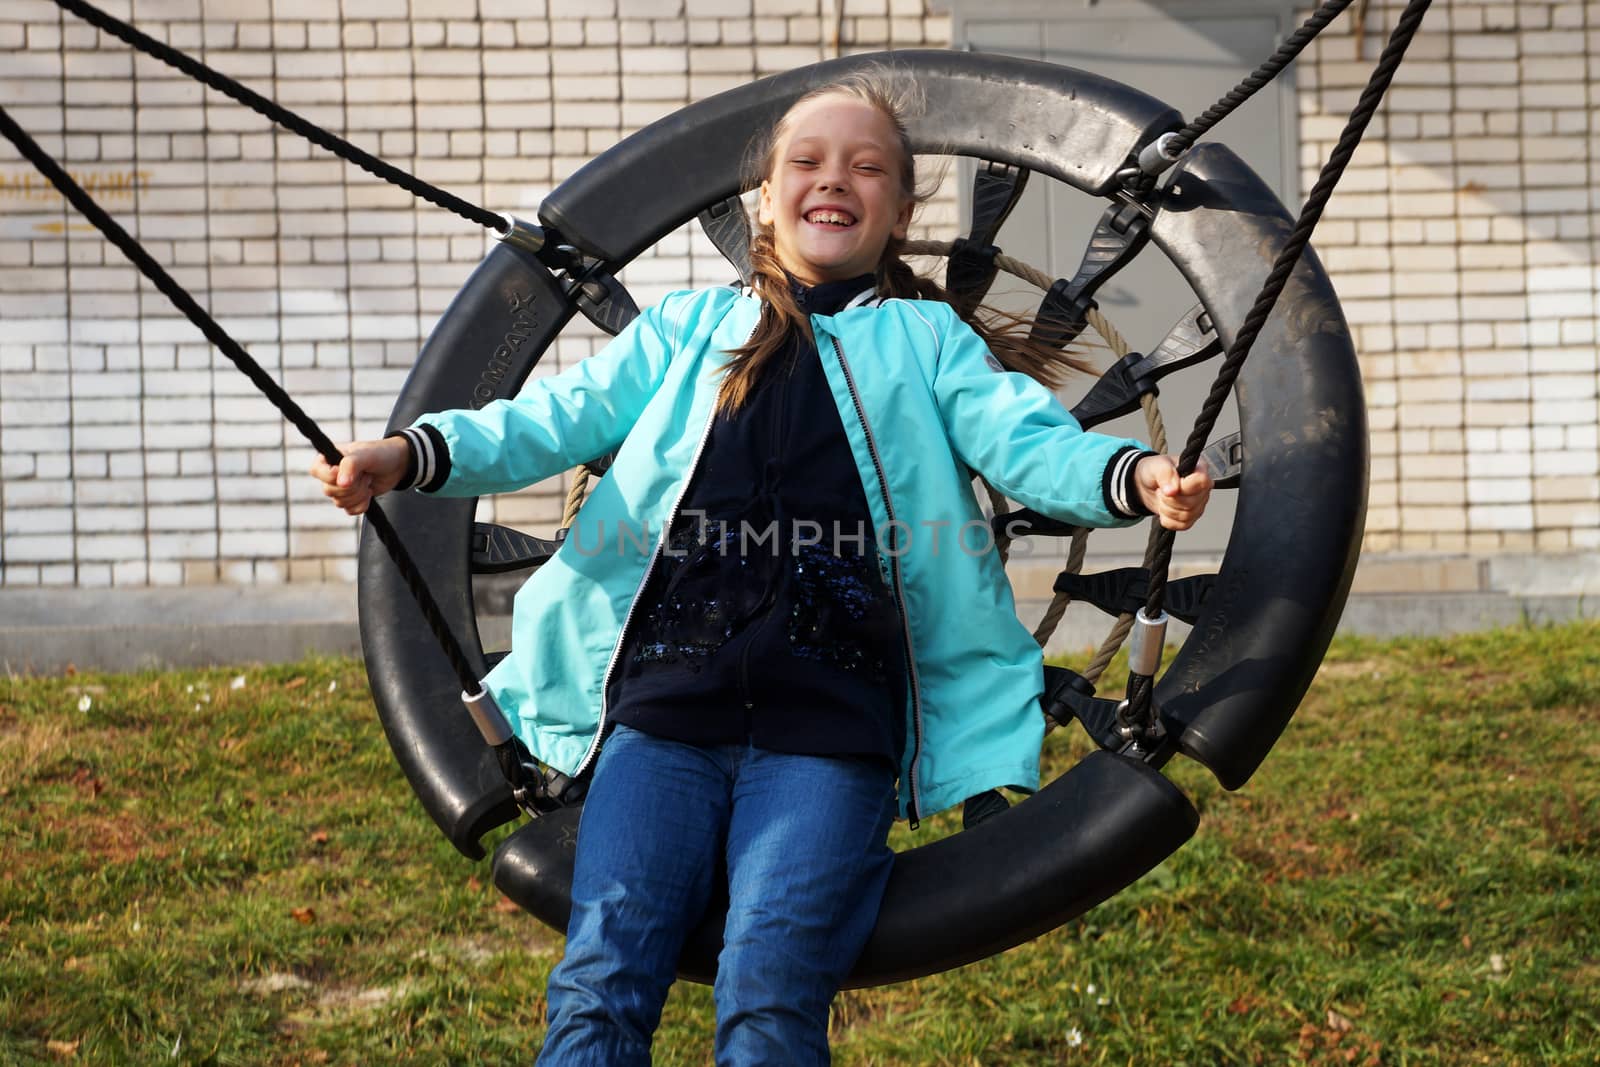 Little girl riding a swing and laughing in the park